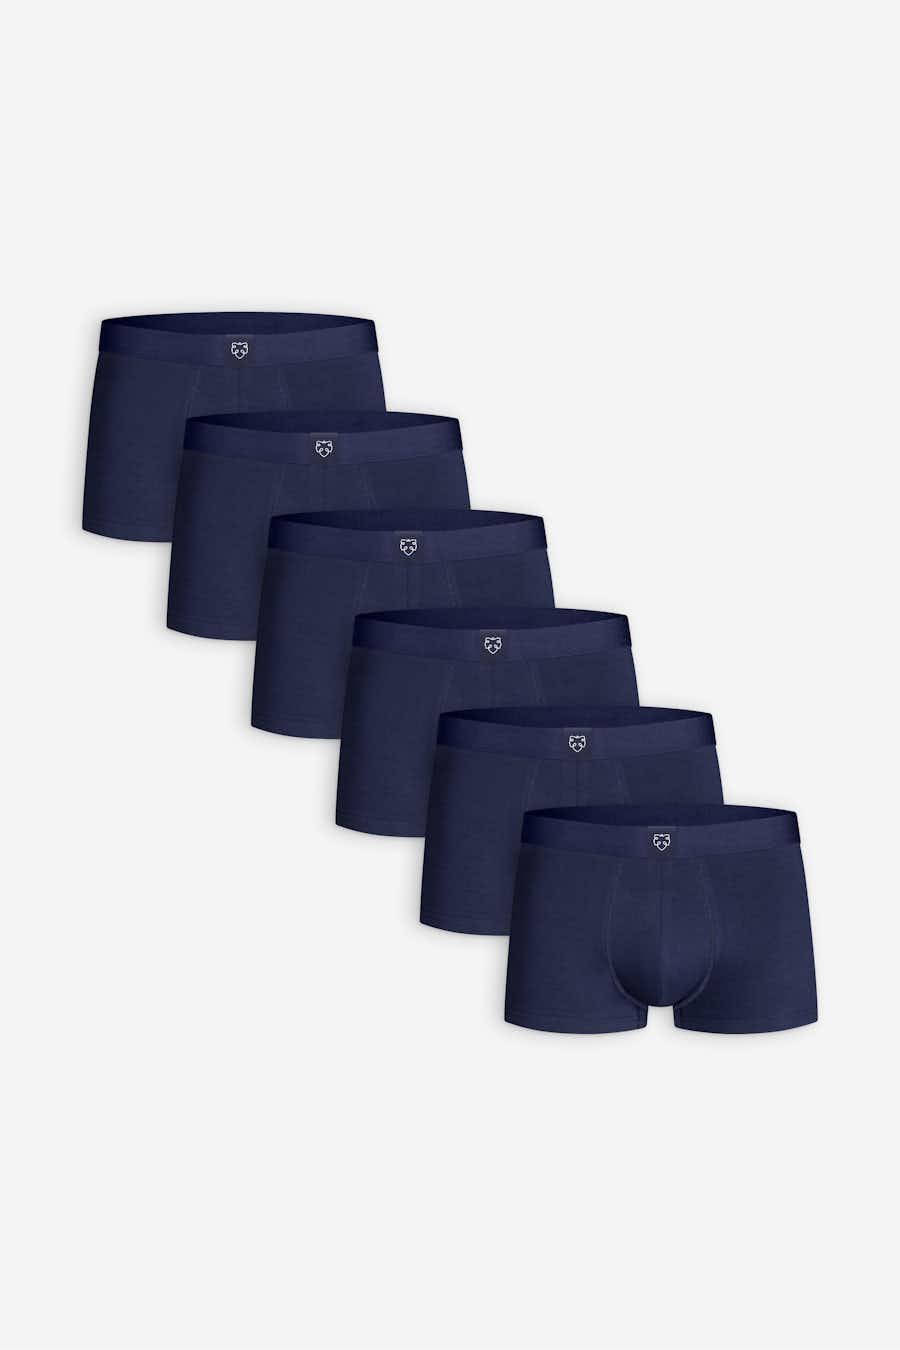 6xSolid Navy Trunks